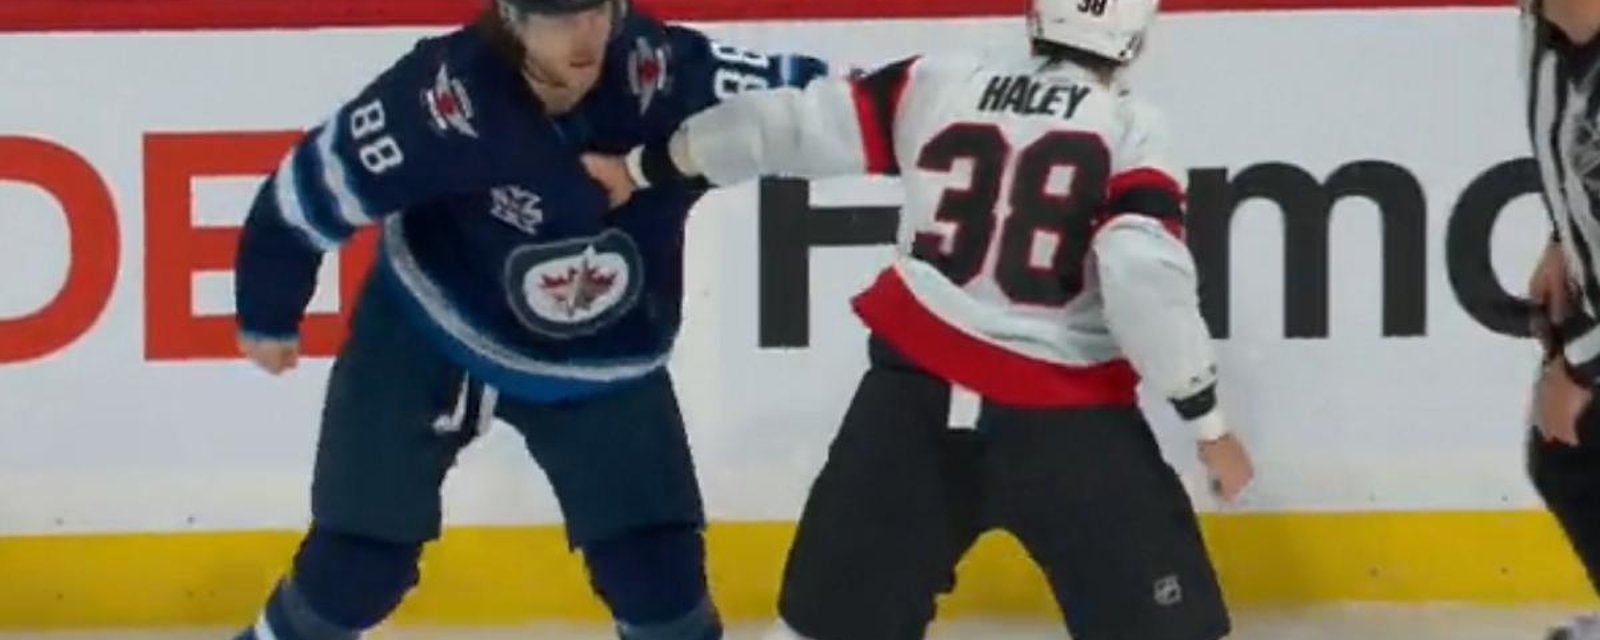 Beaulieu and Haley throwdown in front of the Jets bench.